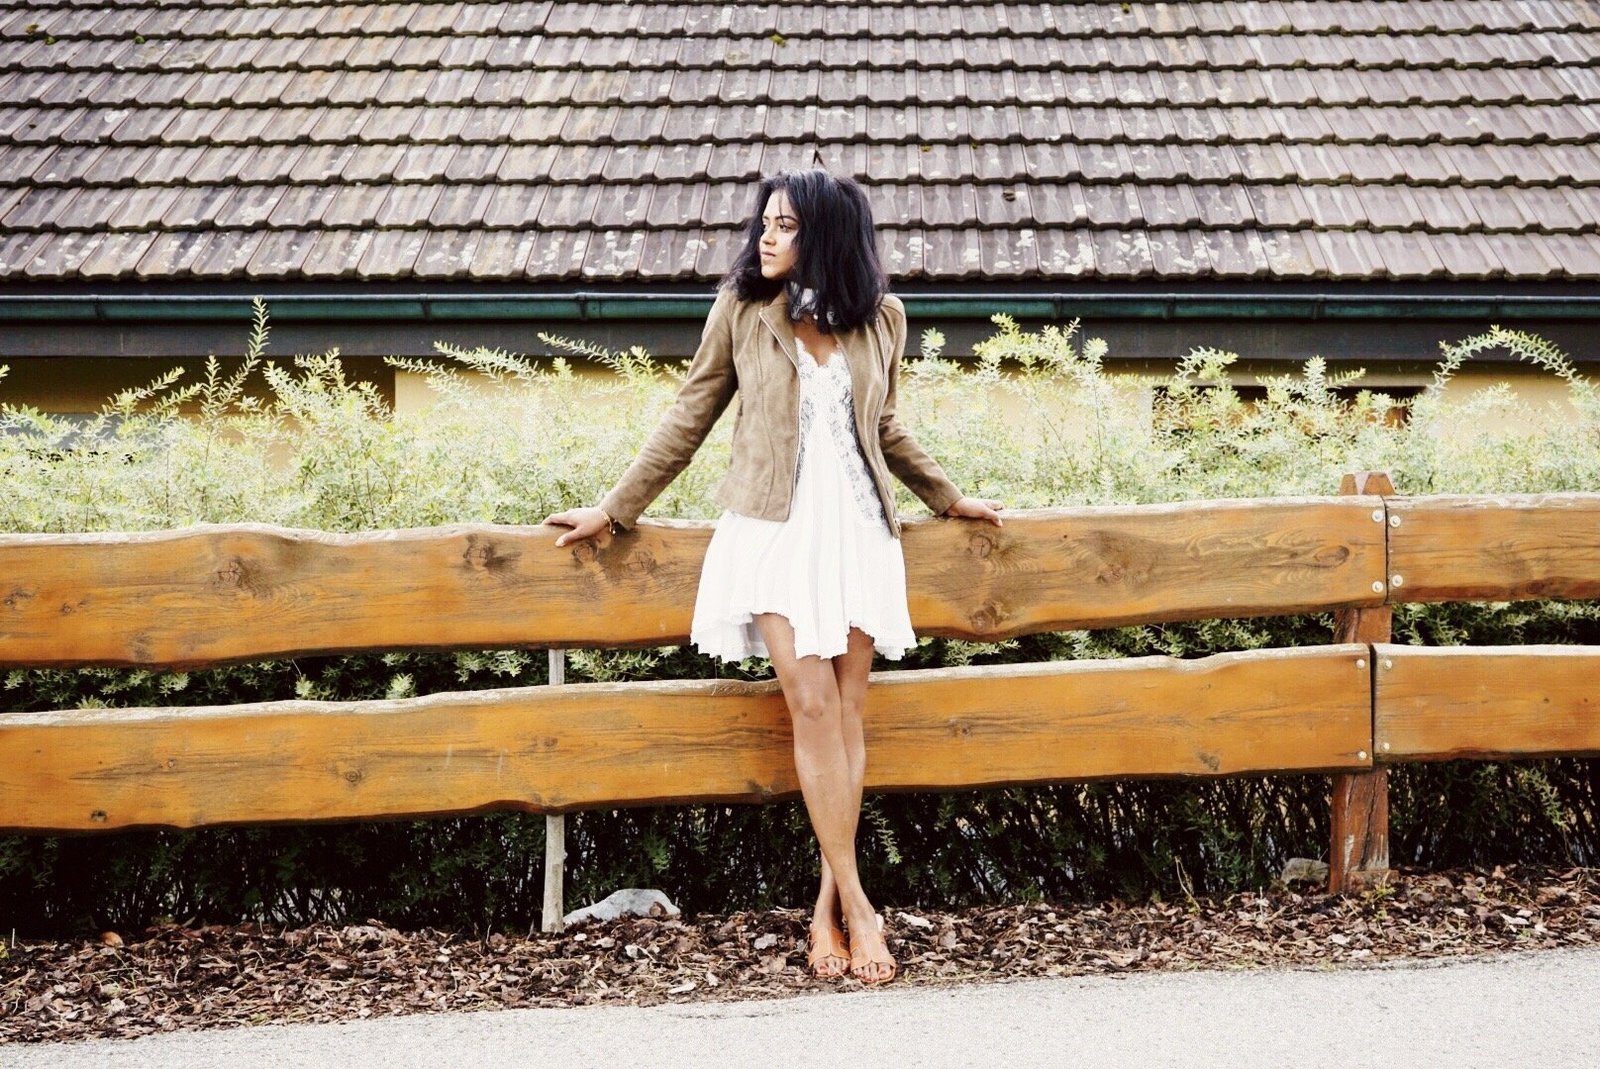 Sachini wearing a brown jacket and white dress in an outdoor environment leaning against a fence